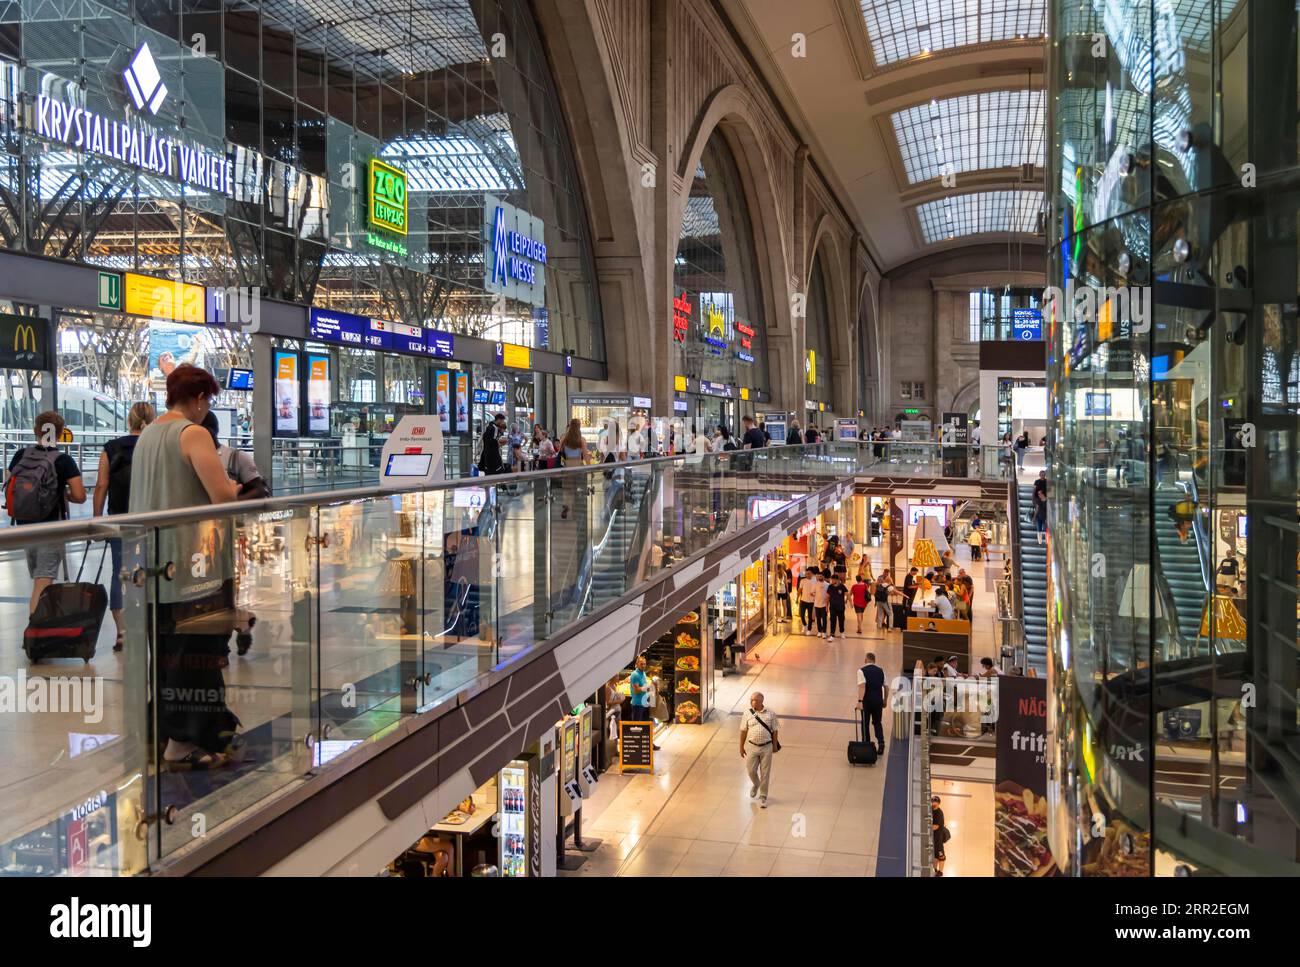 Promenades in the station building of Leipzig Central Station. Over 140 shops, restaurants and service providers on three floors fill the interior of Stock Photo